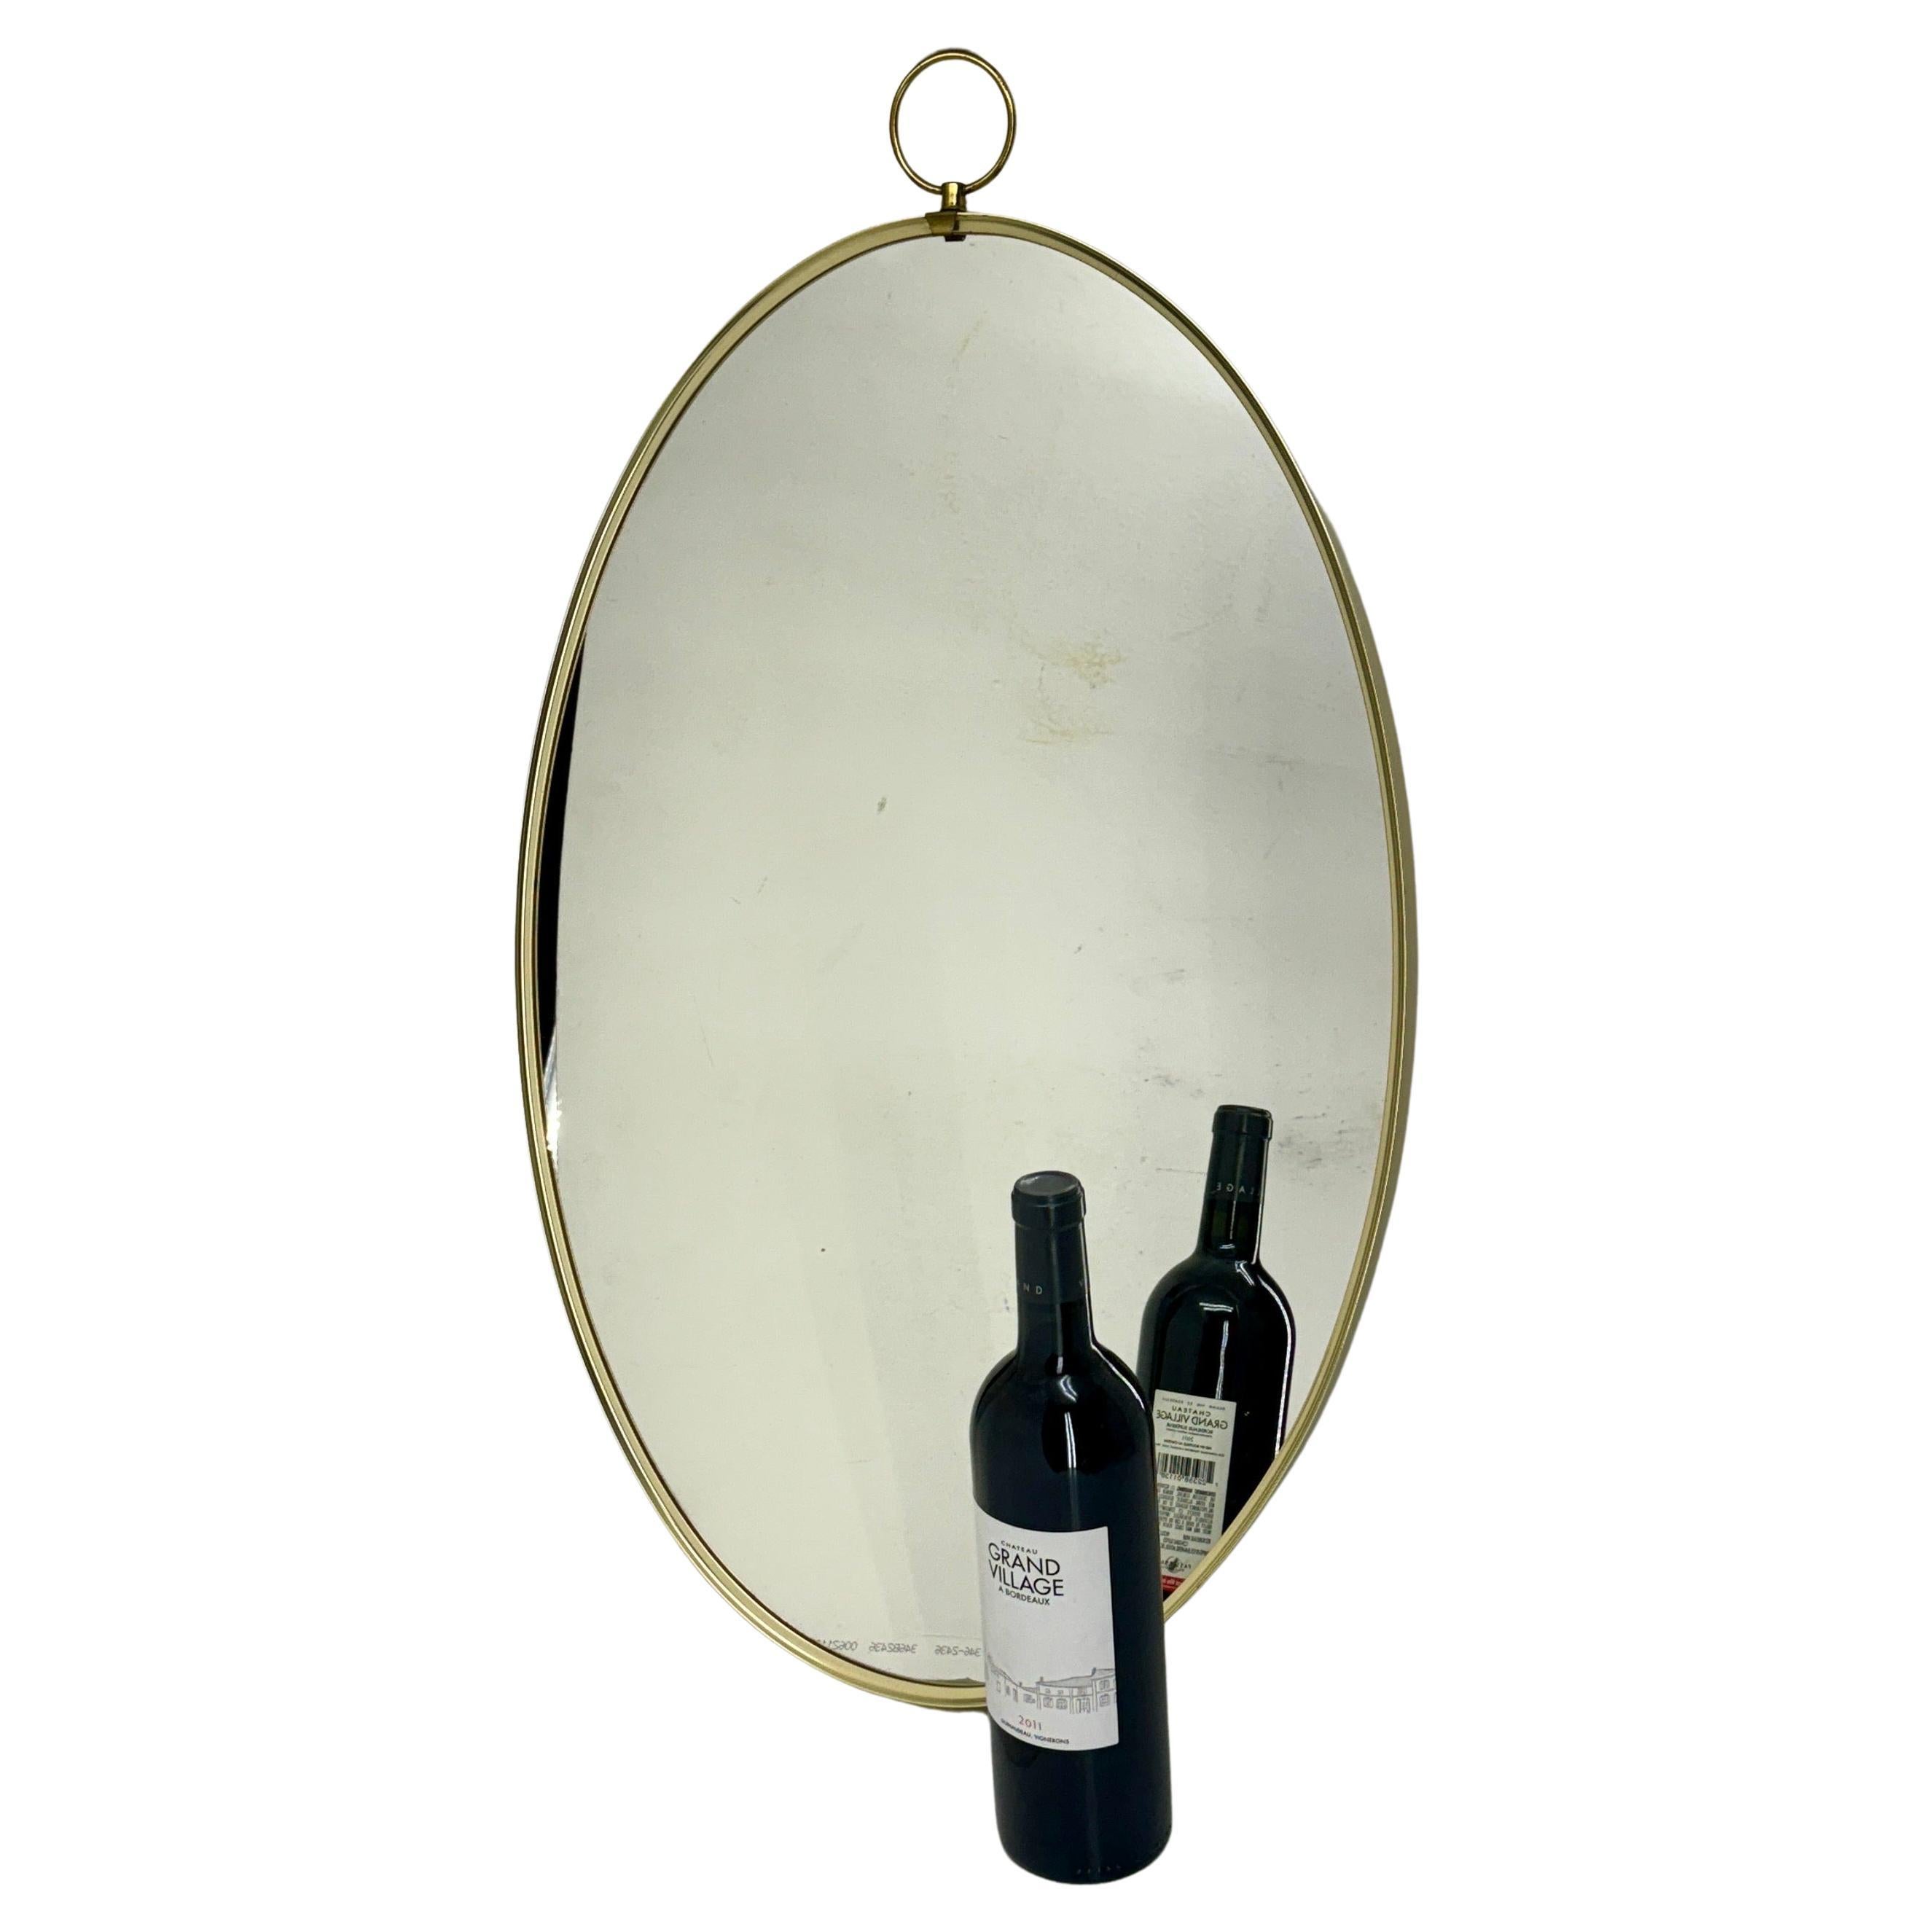 Italian Gio Ponti Oval Brass Wall Mirror Mid-Century Modern
 
Elegant vintage Italian oval brass wall mirror from the 1960s with original patina. Classic mirror which would bring timeless charm for an entry way, bathroom or bedroom. 